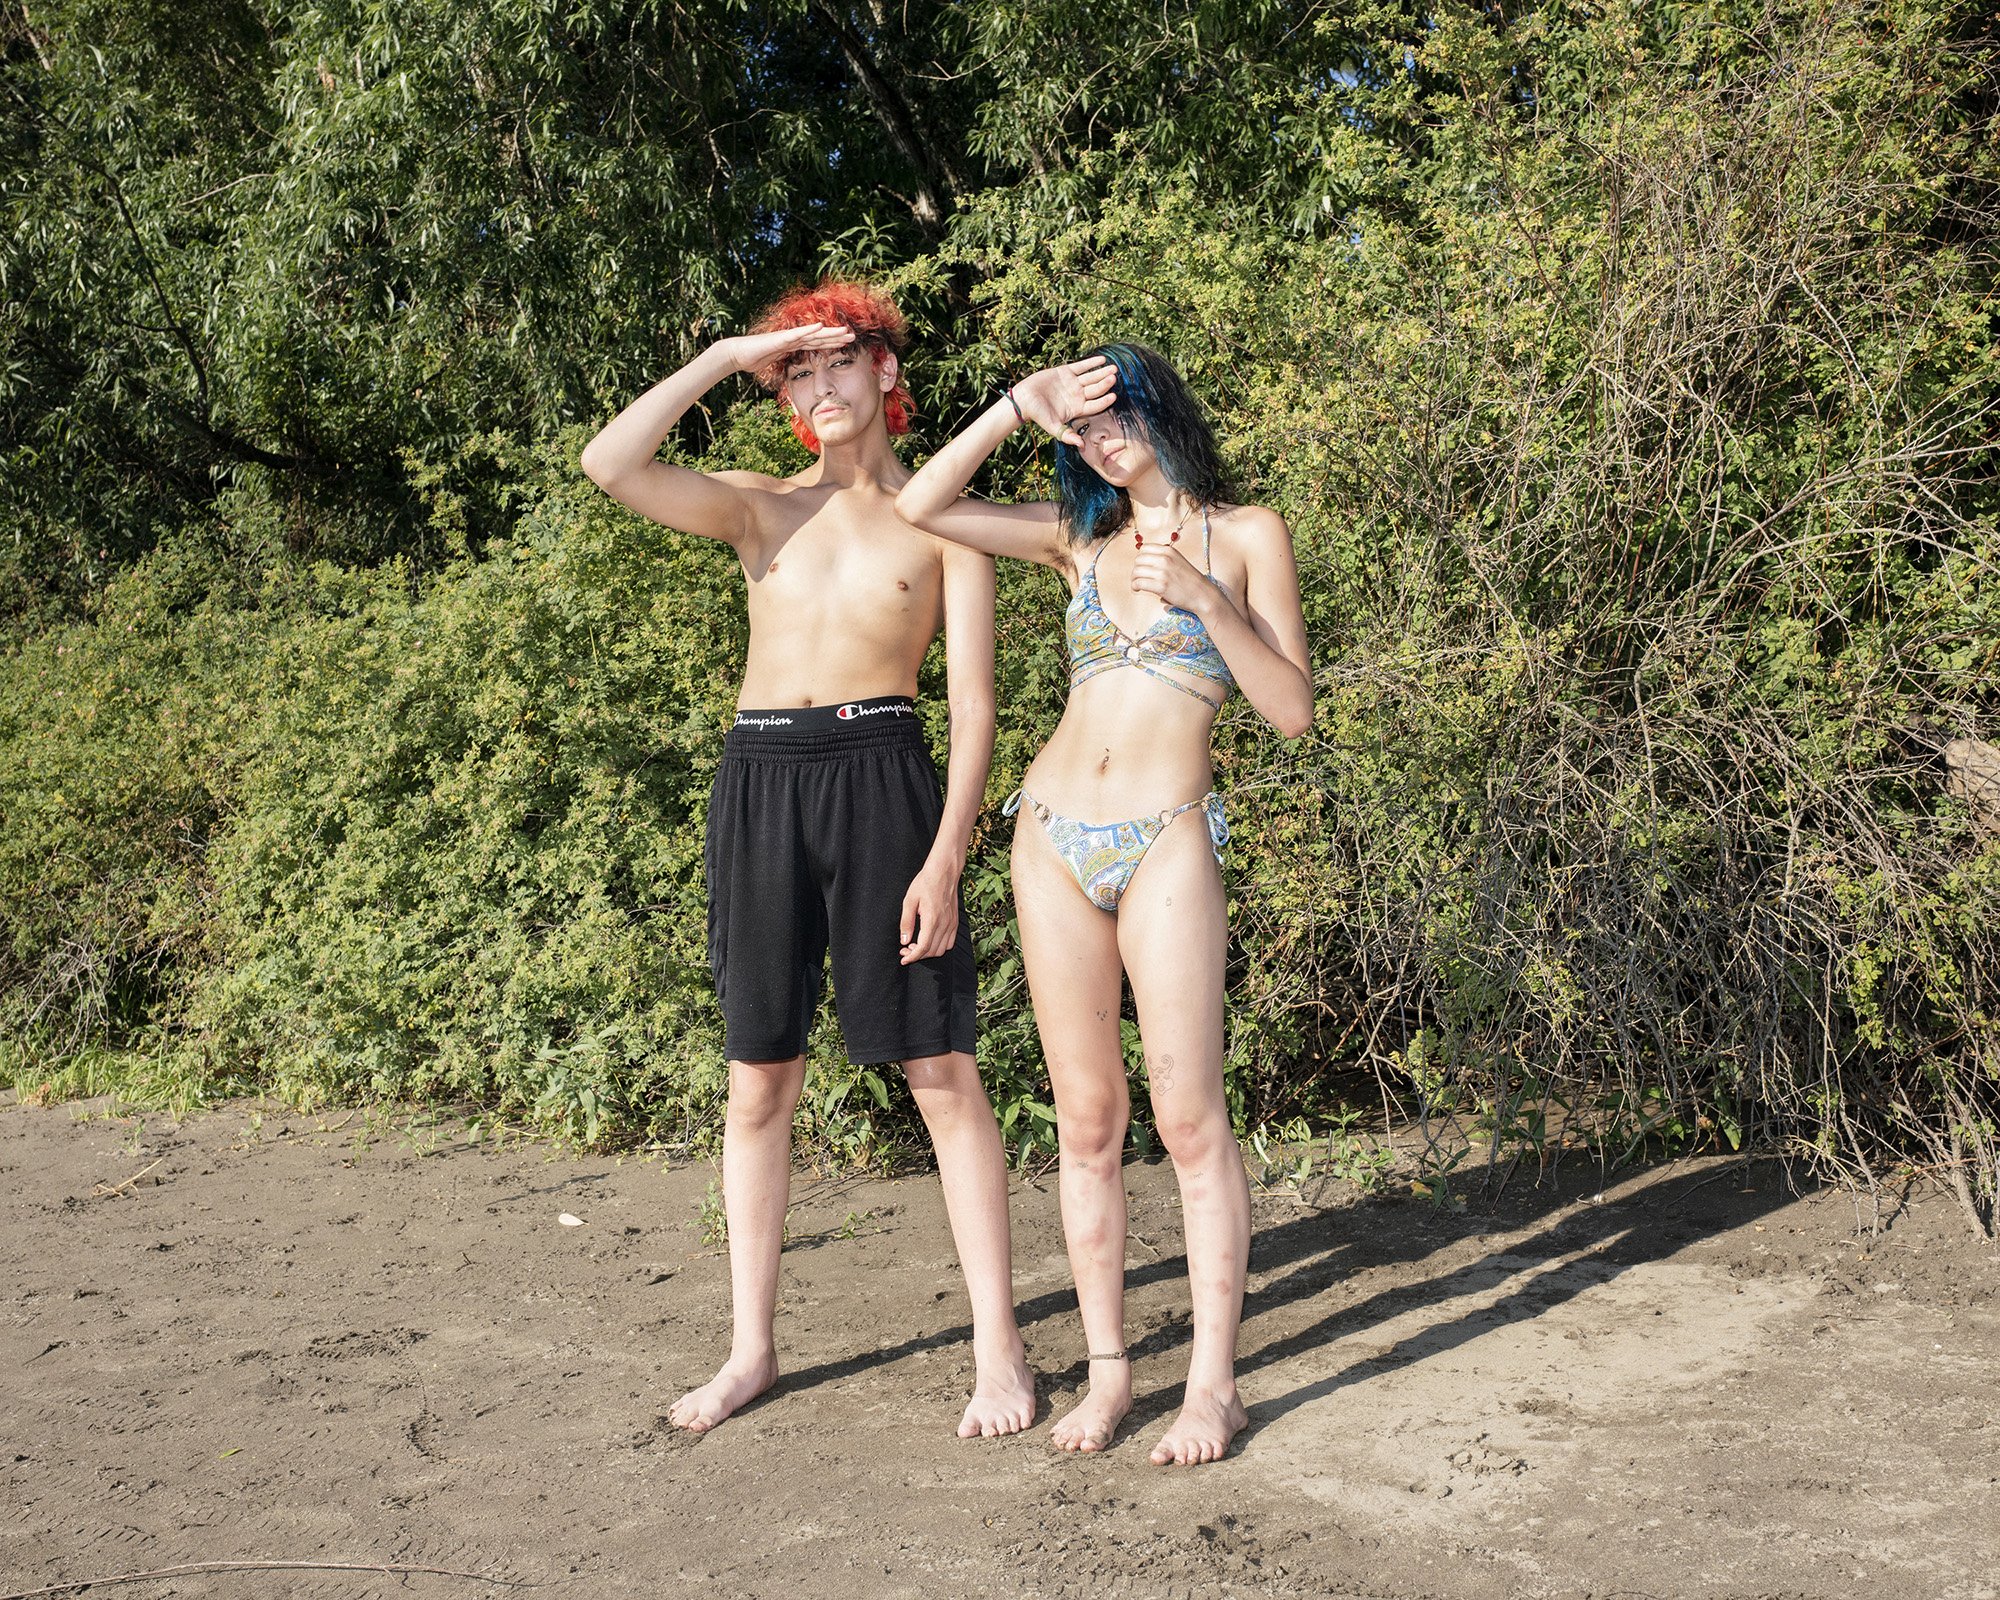  Isaiah Vankova and Sofia Zambrano, both 18, stand on the bank of the Willamette River near Sellwood Riverfront Park on June 27 in Portland, Oregon. Record-shattering heat in Portland, where that day it was hotter than Dubai, would lead to canceled s